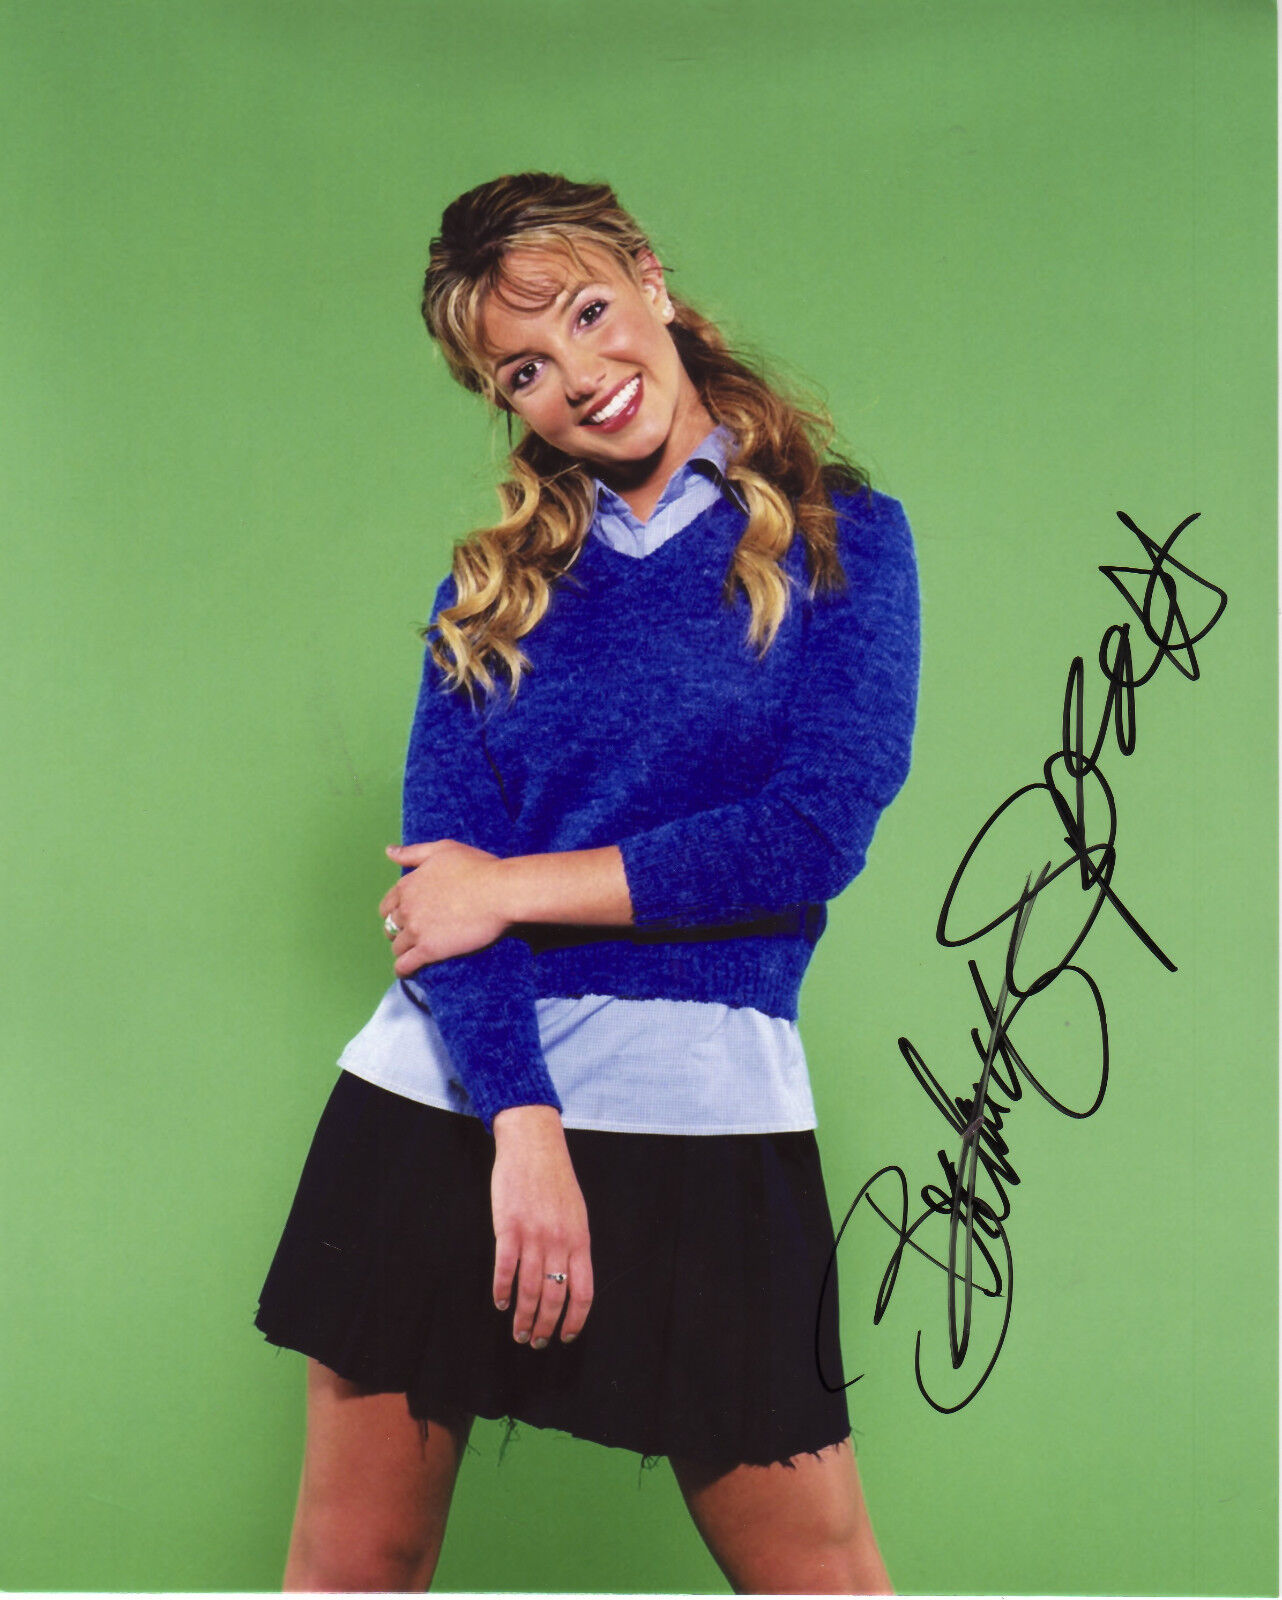 BRITNEY SPEARS AUTOGRAPH SIGNED PP Photo Poster painting POSTER 1